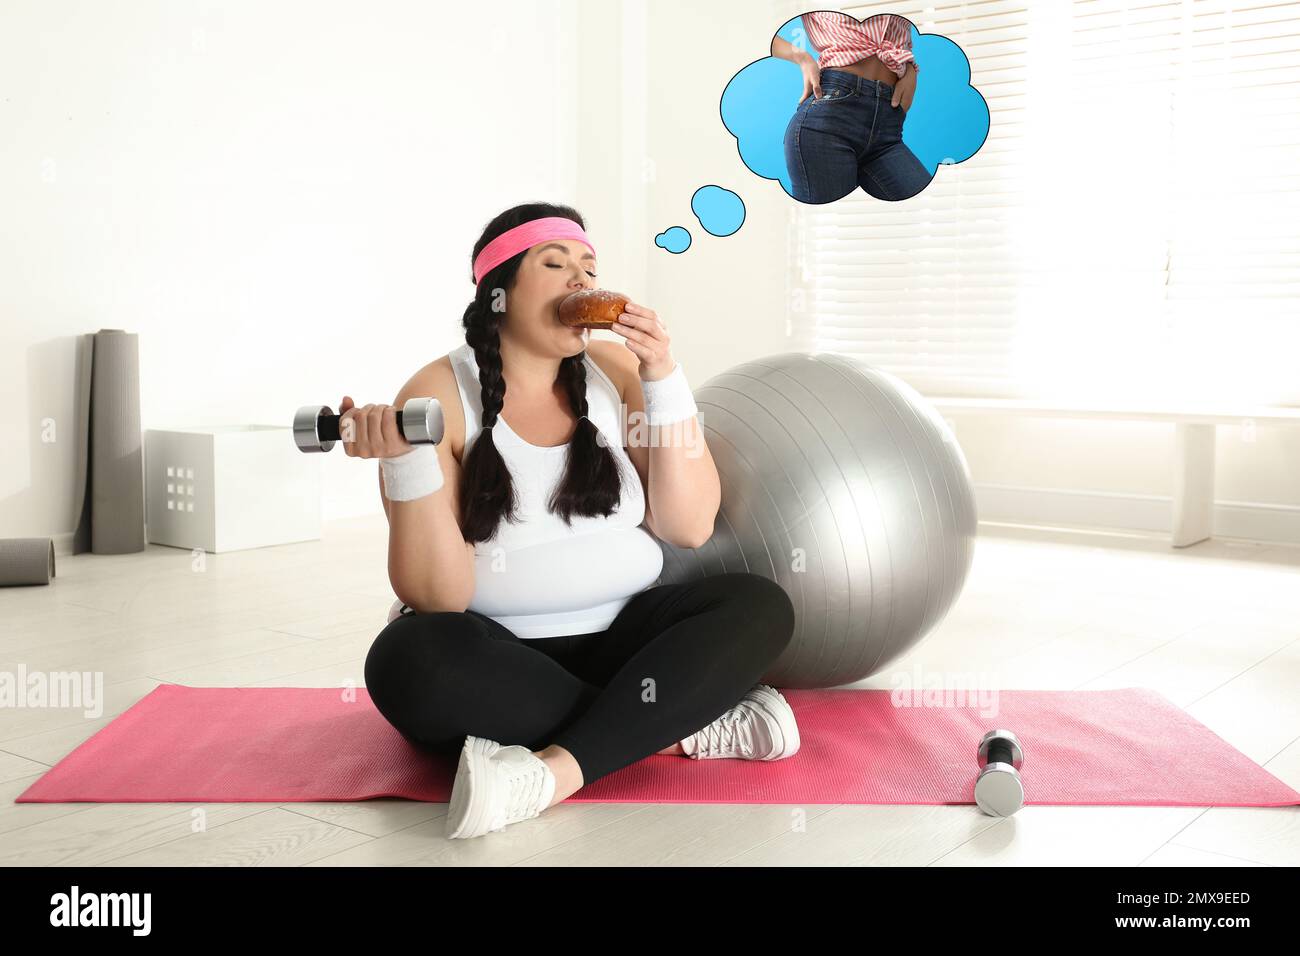 Overweight woman dreaming about slim body while eating bun at gym Stock Photo